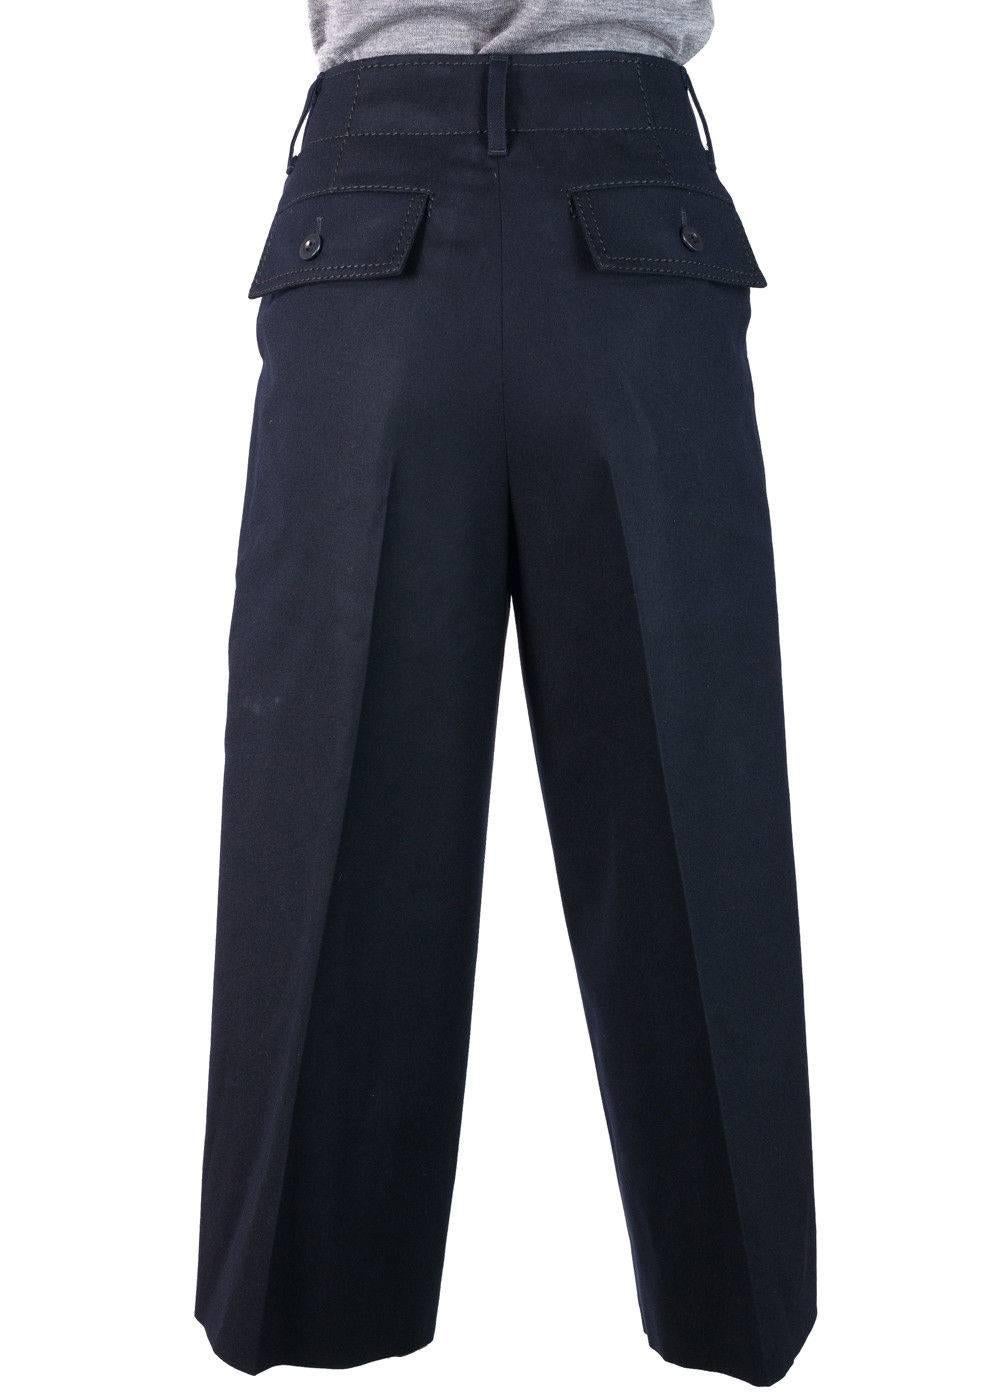 Brand New Sacai Women's Grommet Trim Pocket Culottes
Original with Tags
Retails in Stores & Online for $665
Size Japanese 2 / USA 7 

Sacai blends the overtly masculine silhouette with the serenely feminine in these Culottes. This piece was designed